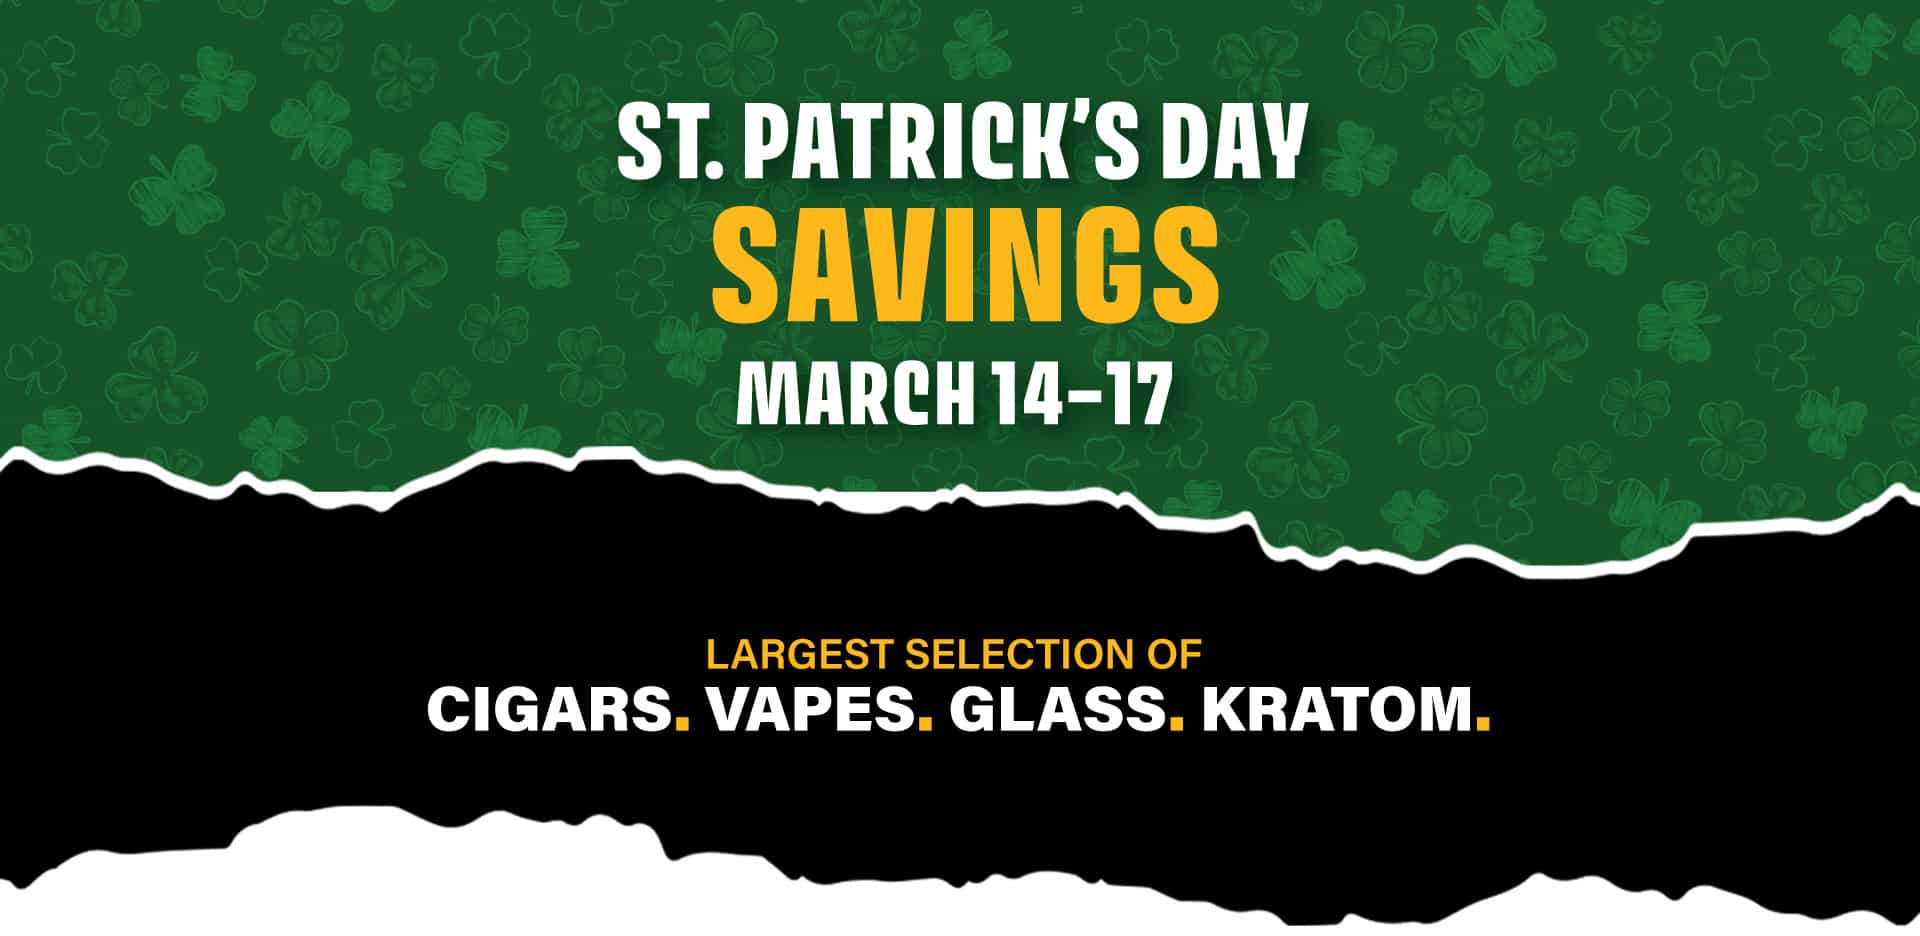 St. Patrick's Day Savings March 14-17